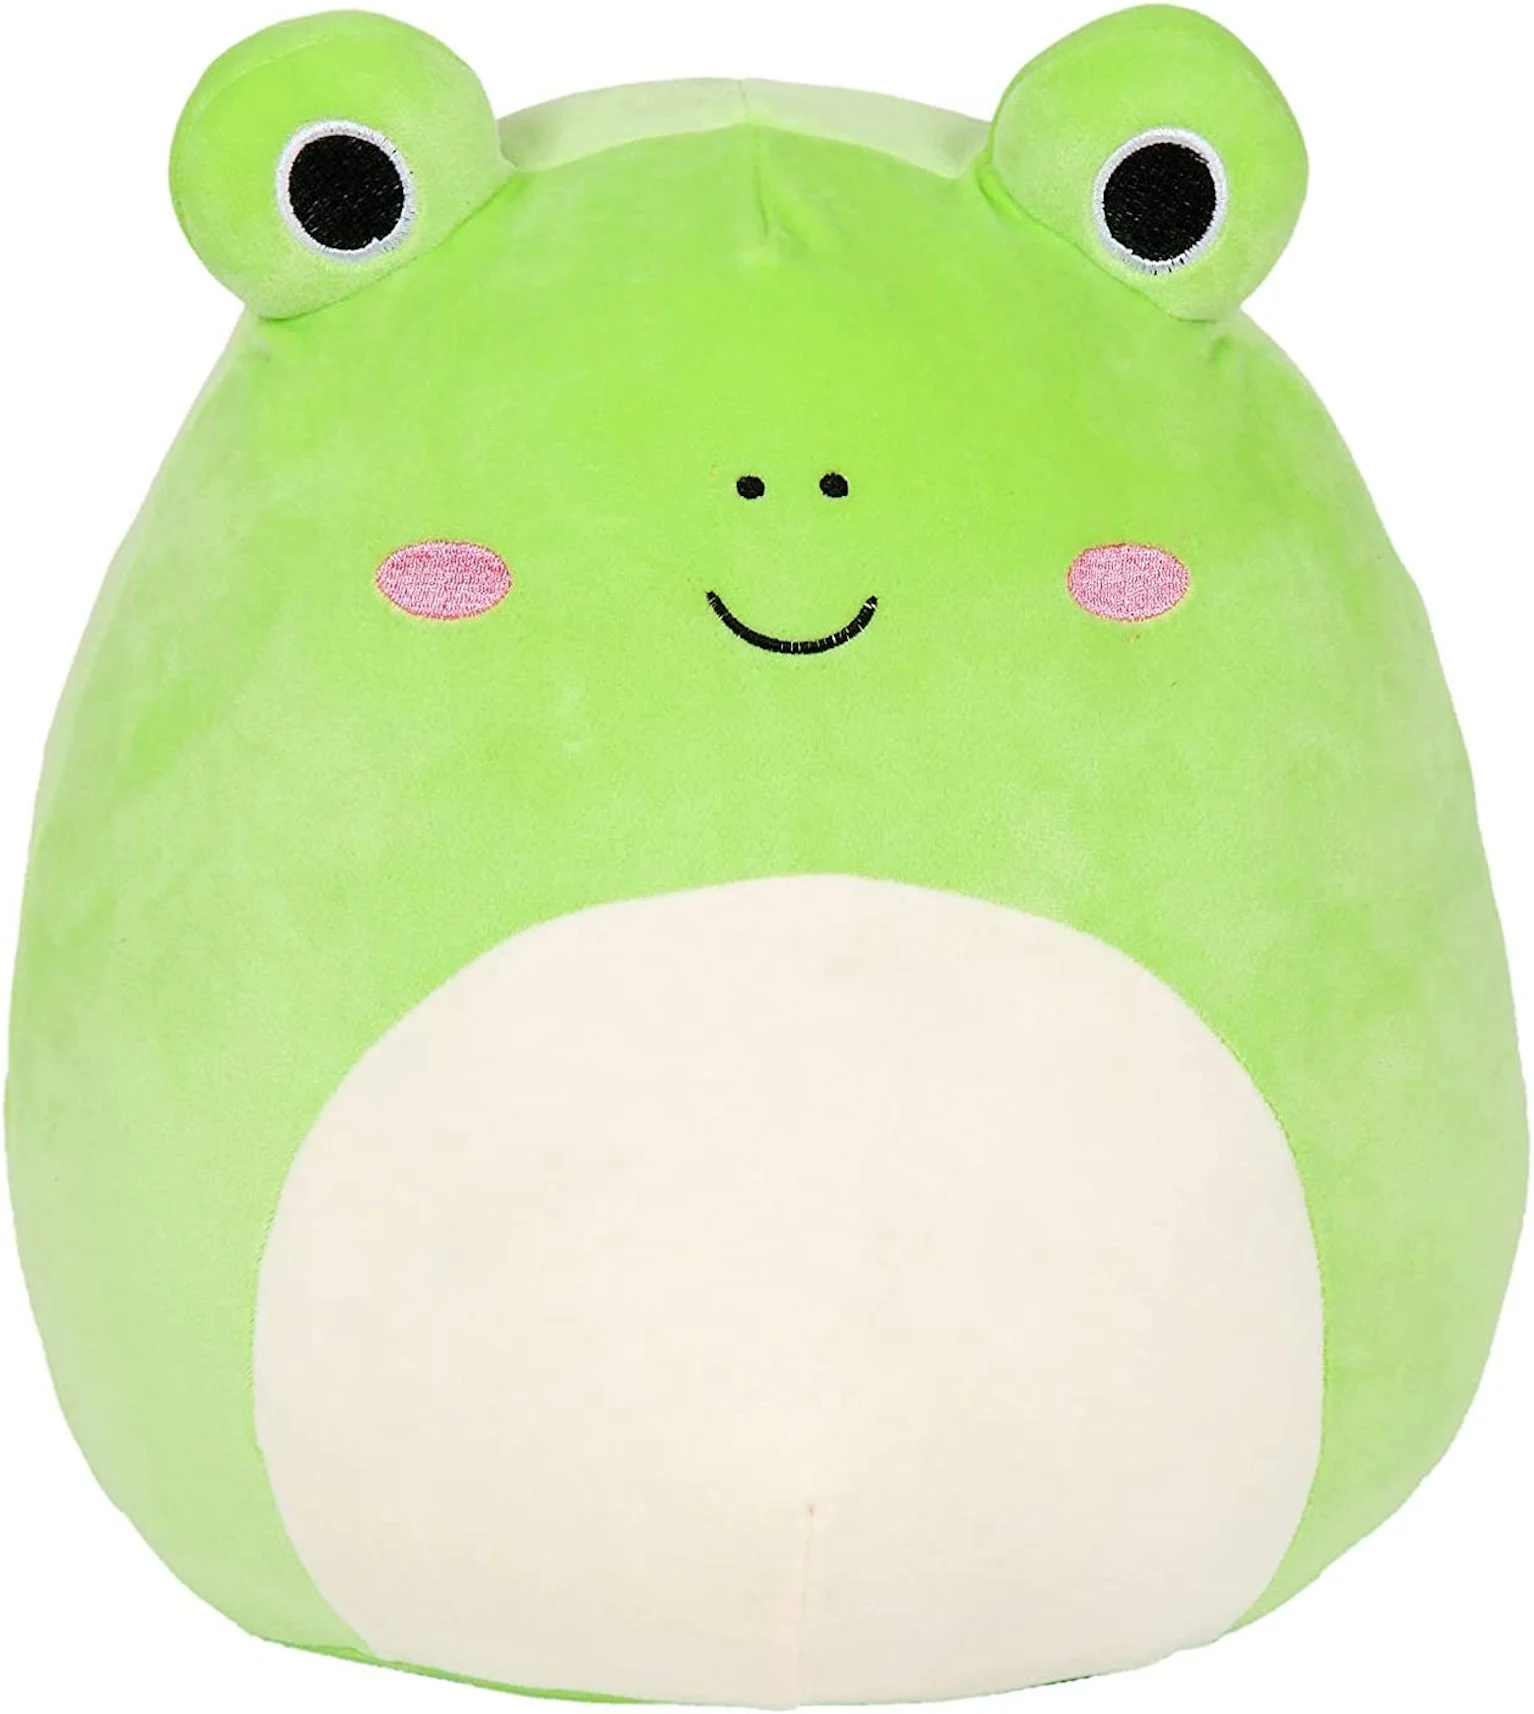 Squishmallow Wendy the Frog 16 Plush Green - US